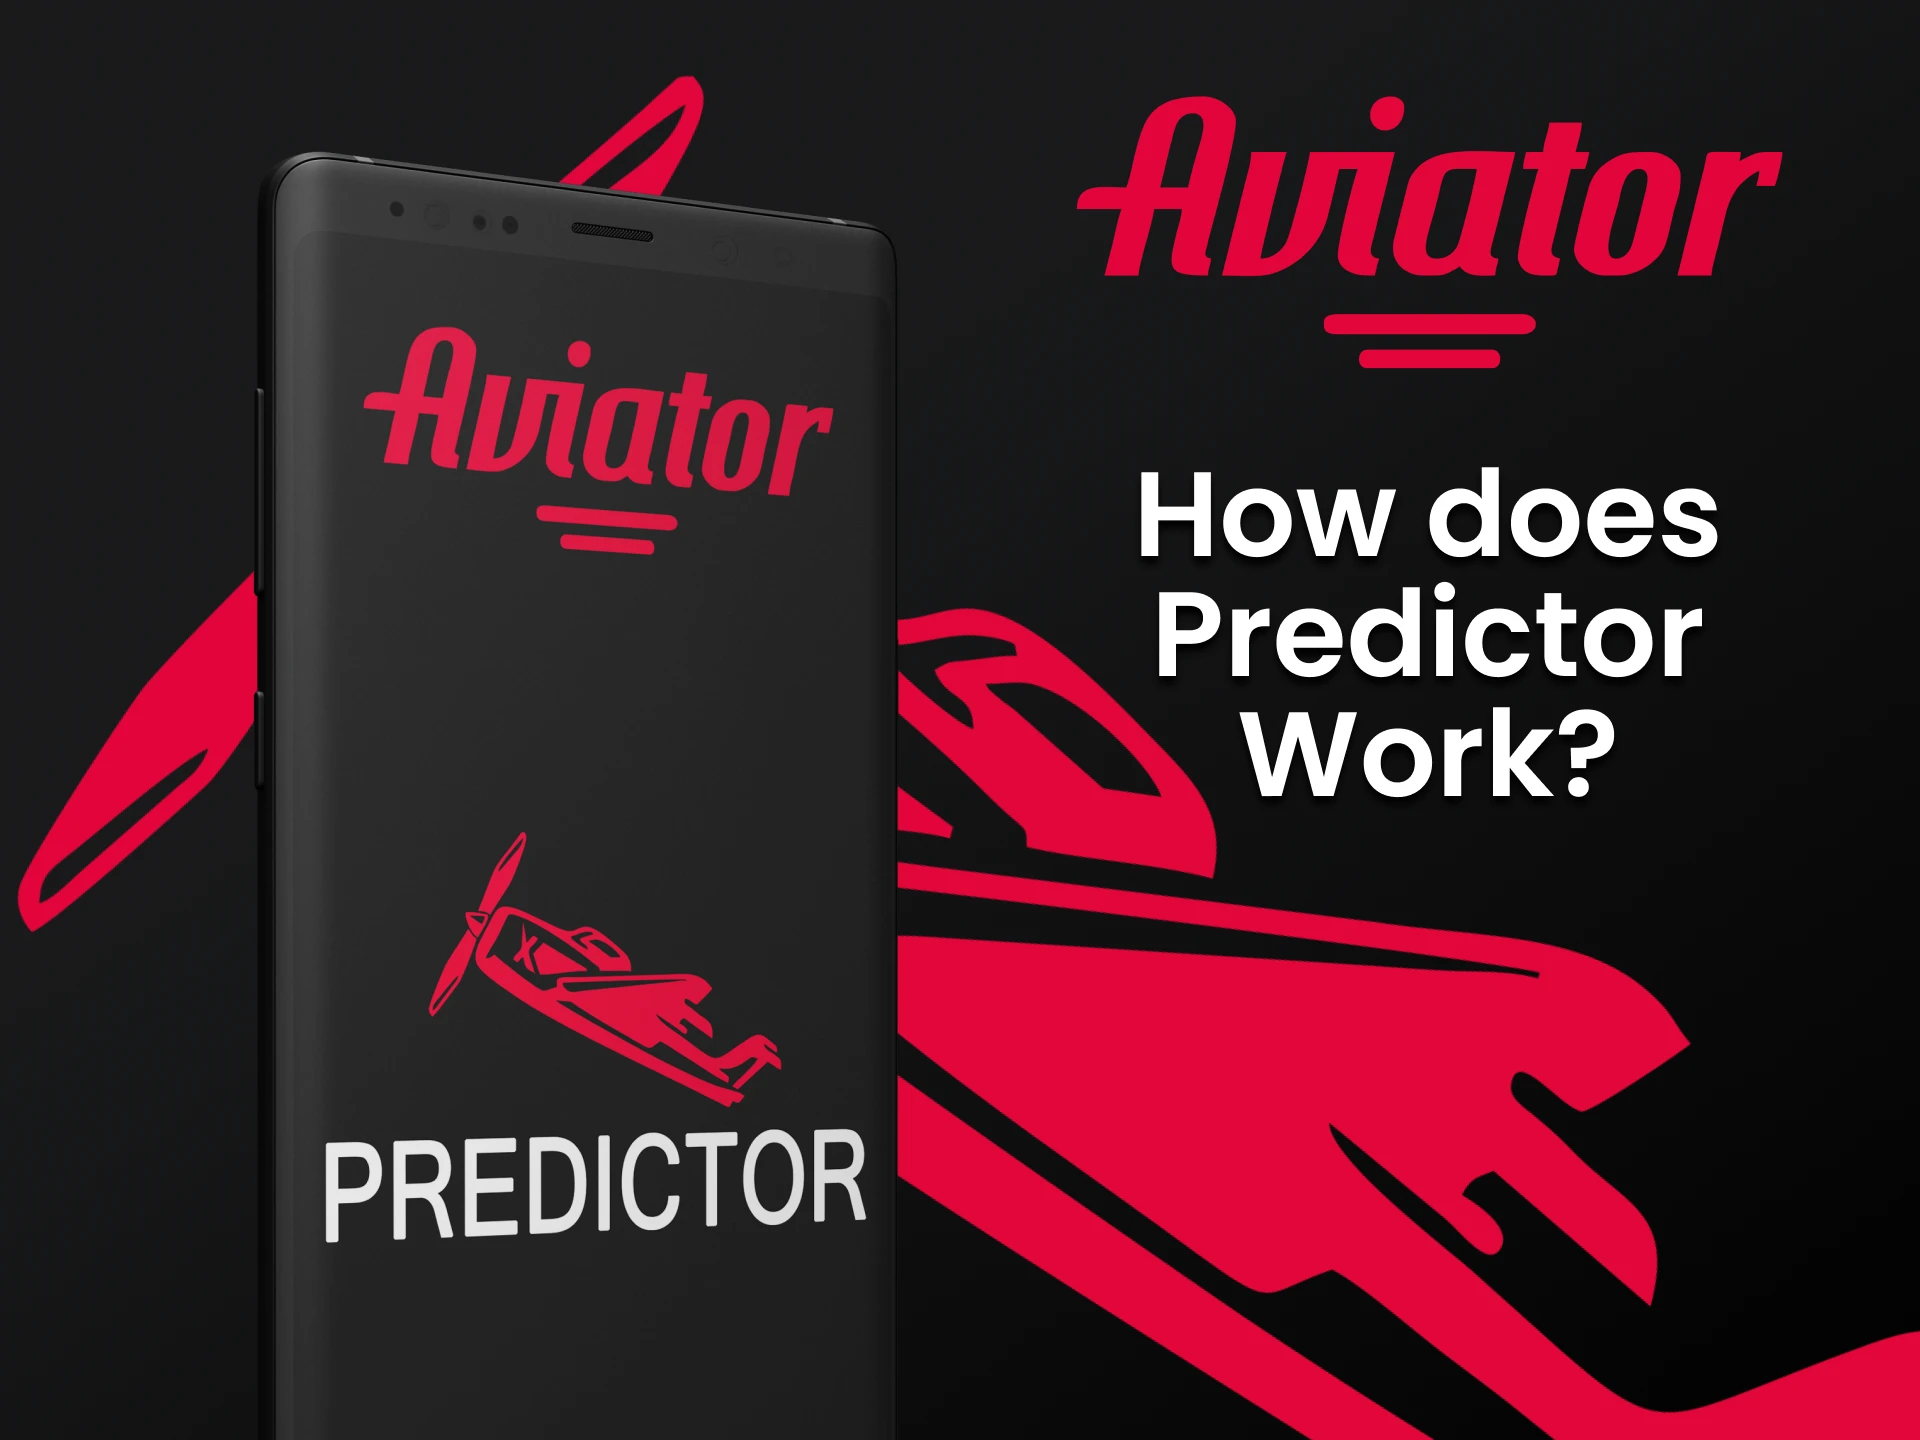 Learn how the Predictor for Aviator works.